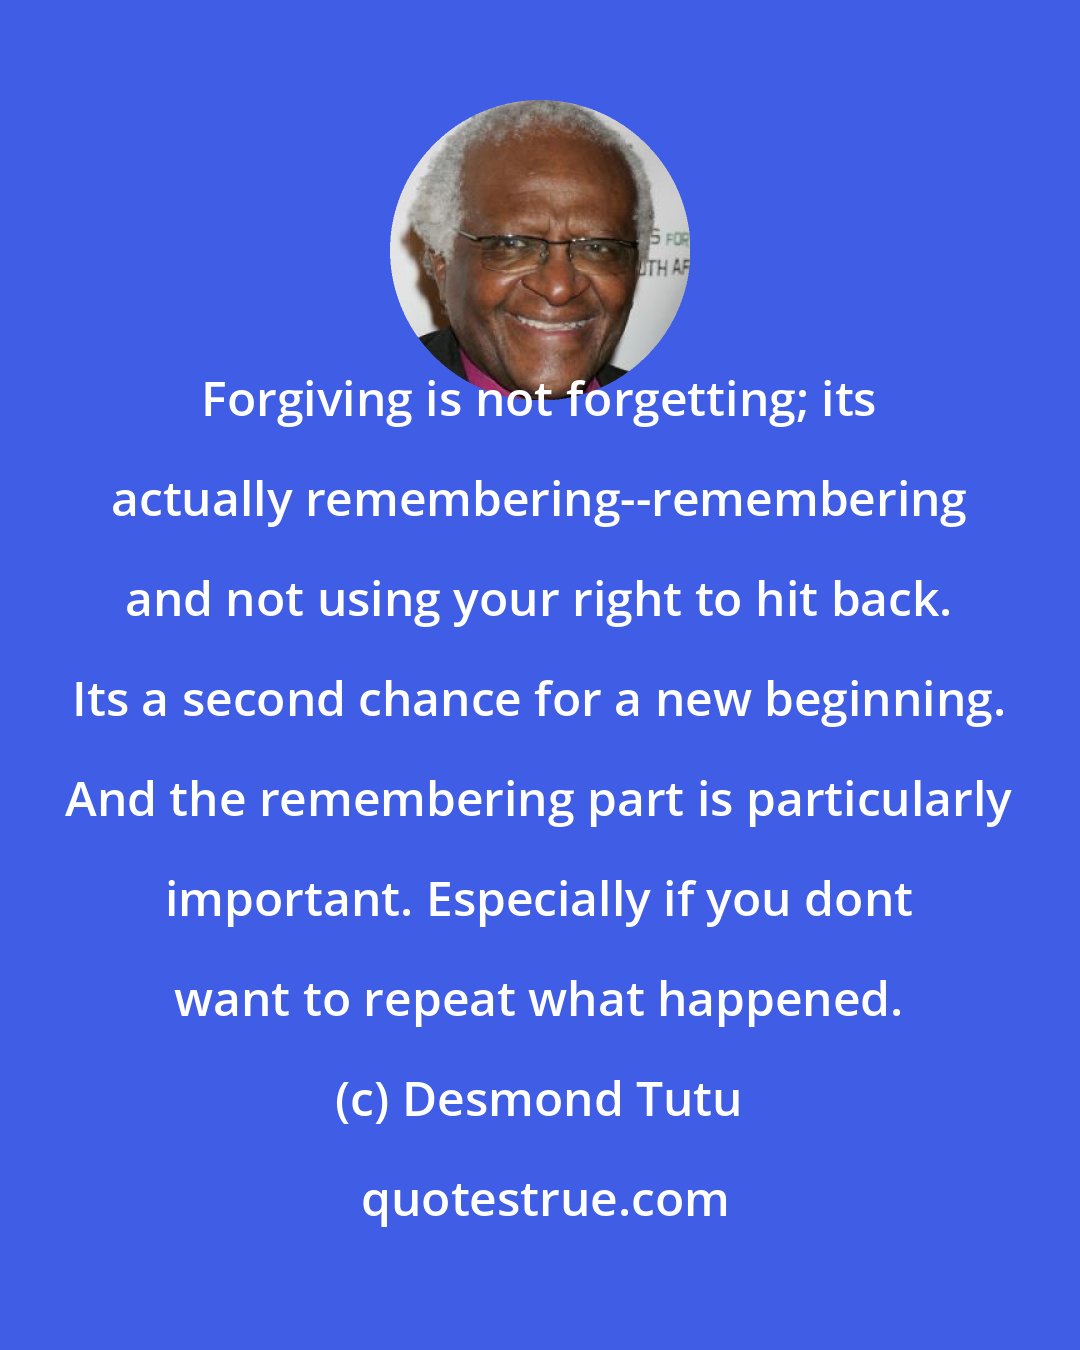 Desmond Tutu: Forgiving is not forgetting; its actually remembering--remembering and not using your right to hit back. Its a second chance for a new beginning. And the remembering part is particularly important. Especially if you dont want to repeat what happened.